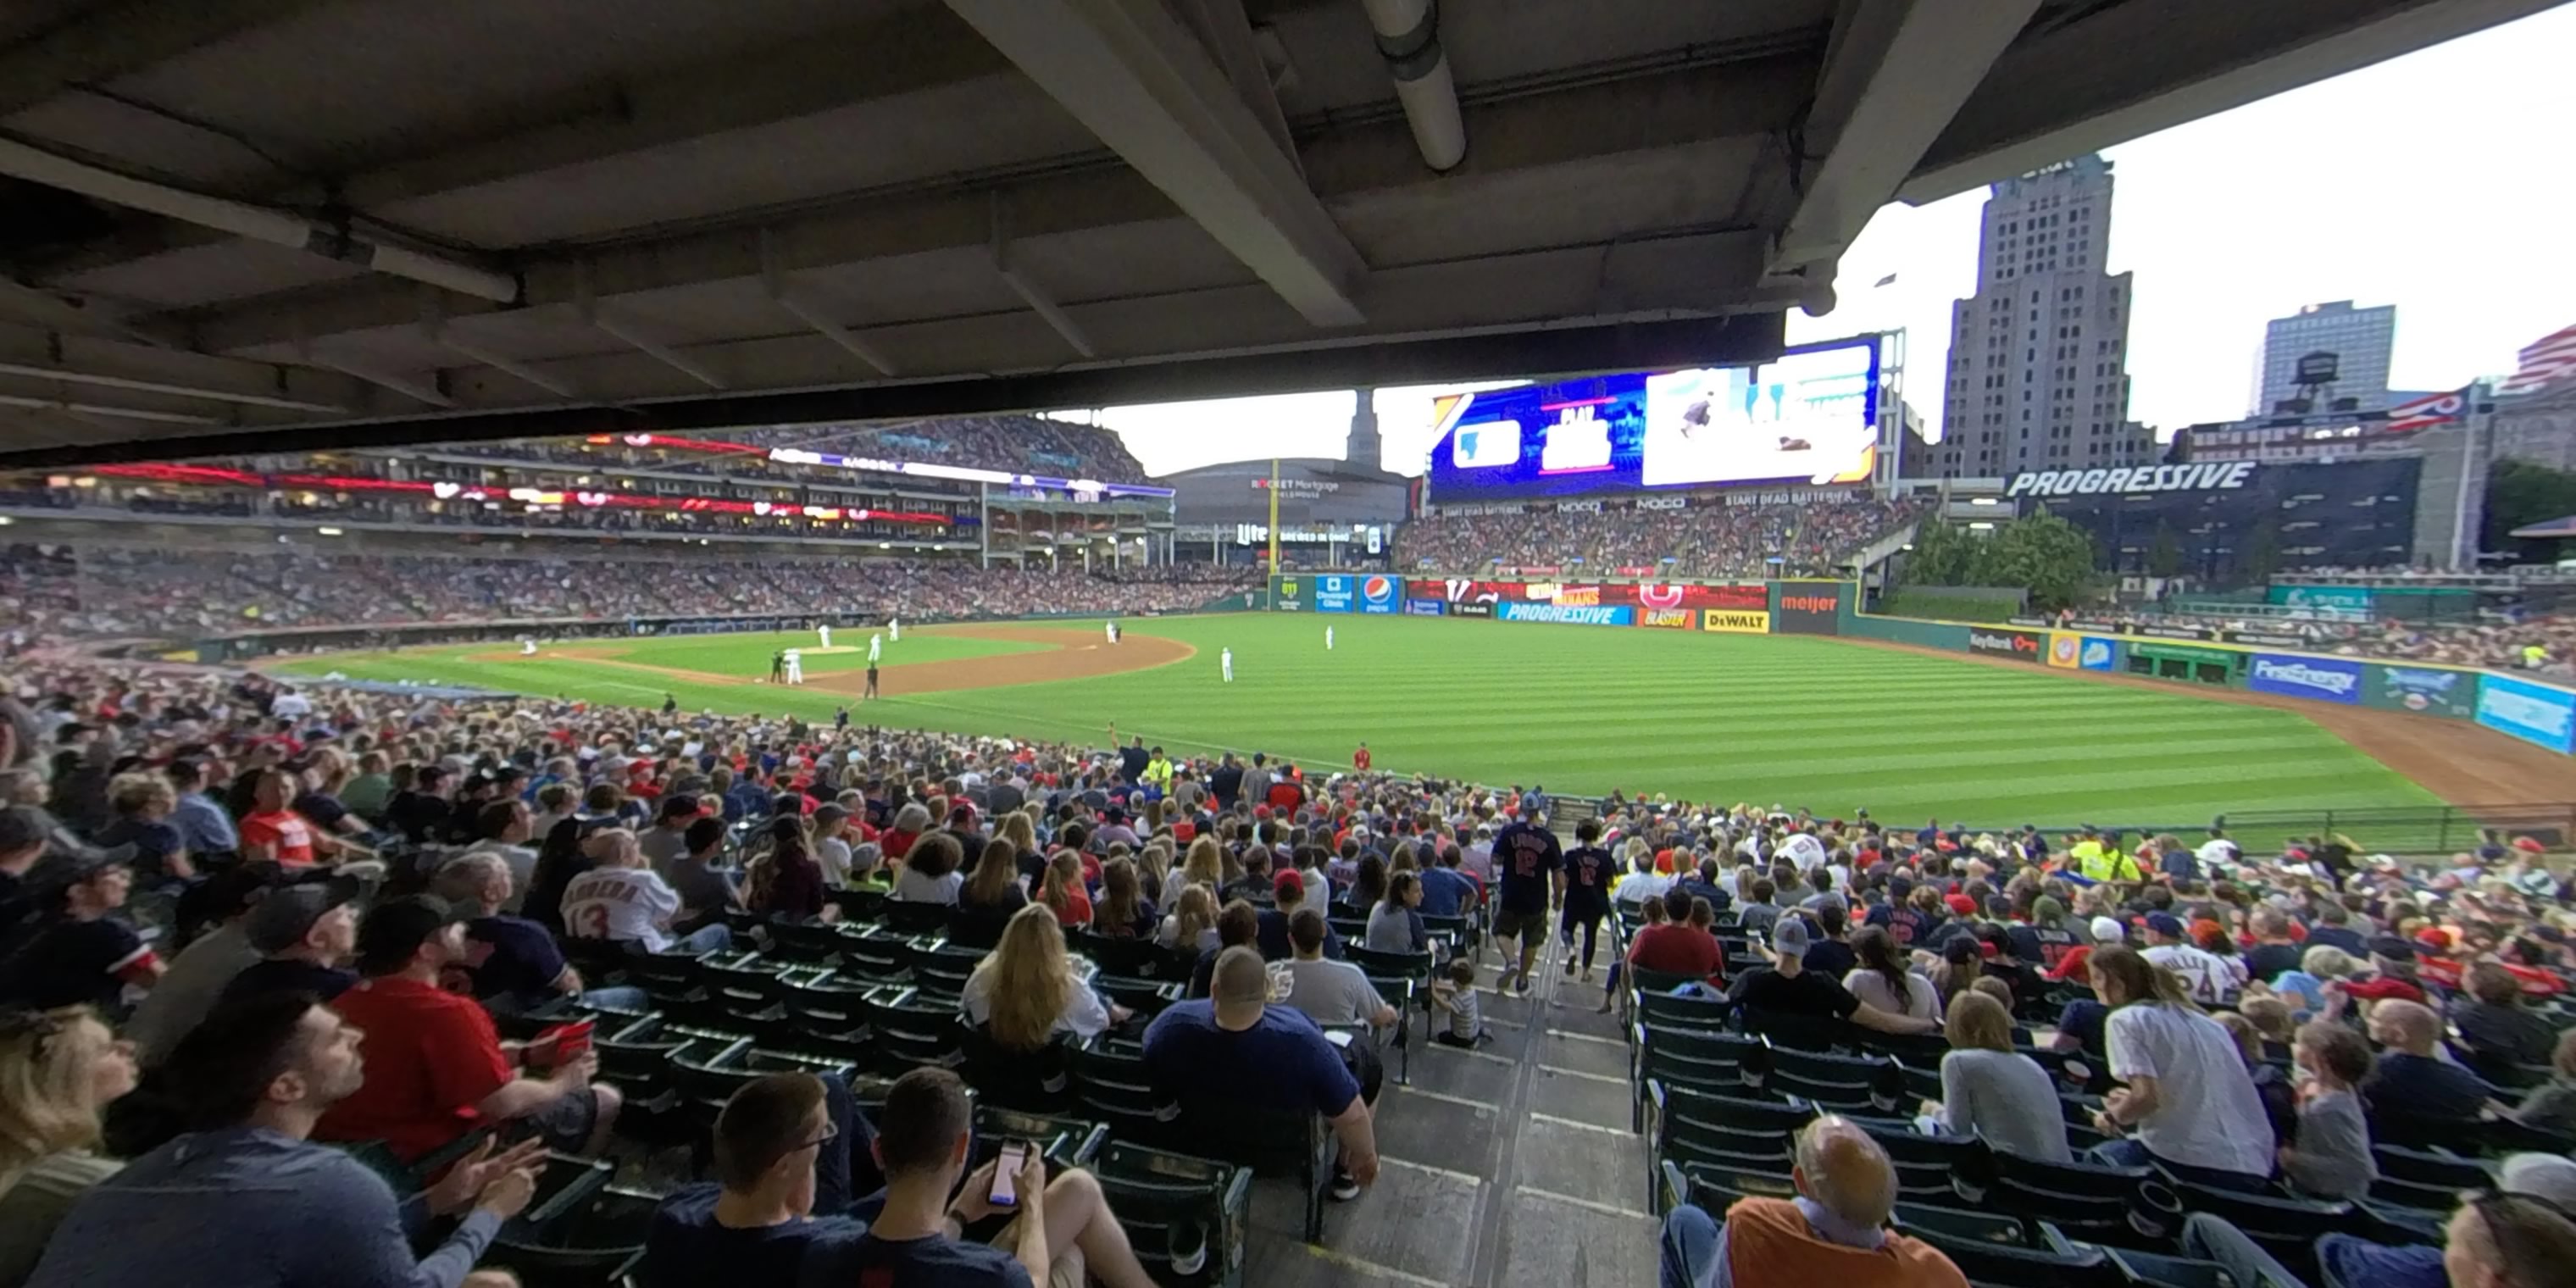 section 128 panoramic seat view  - progressive field